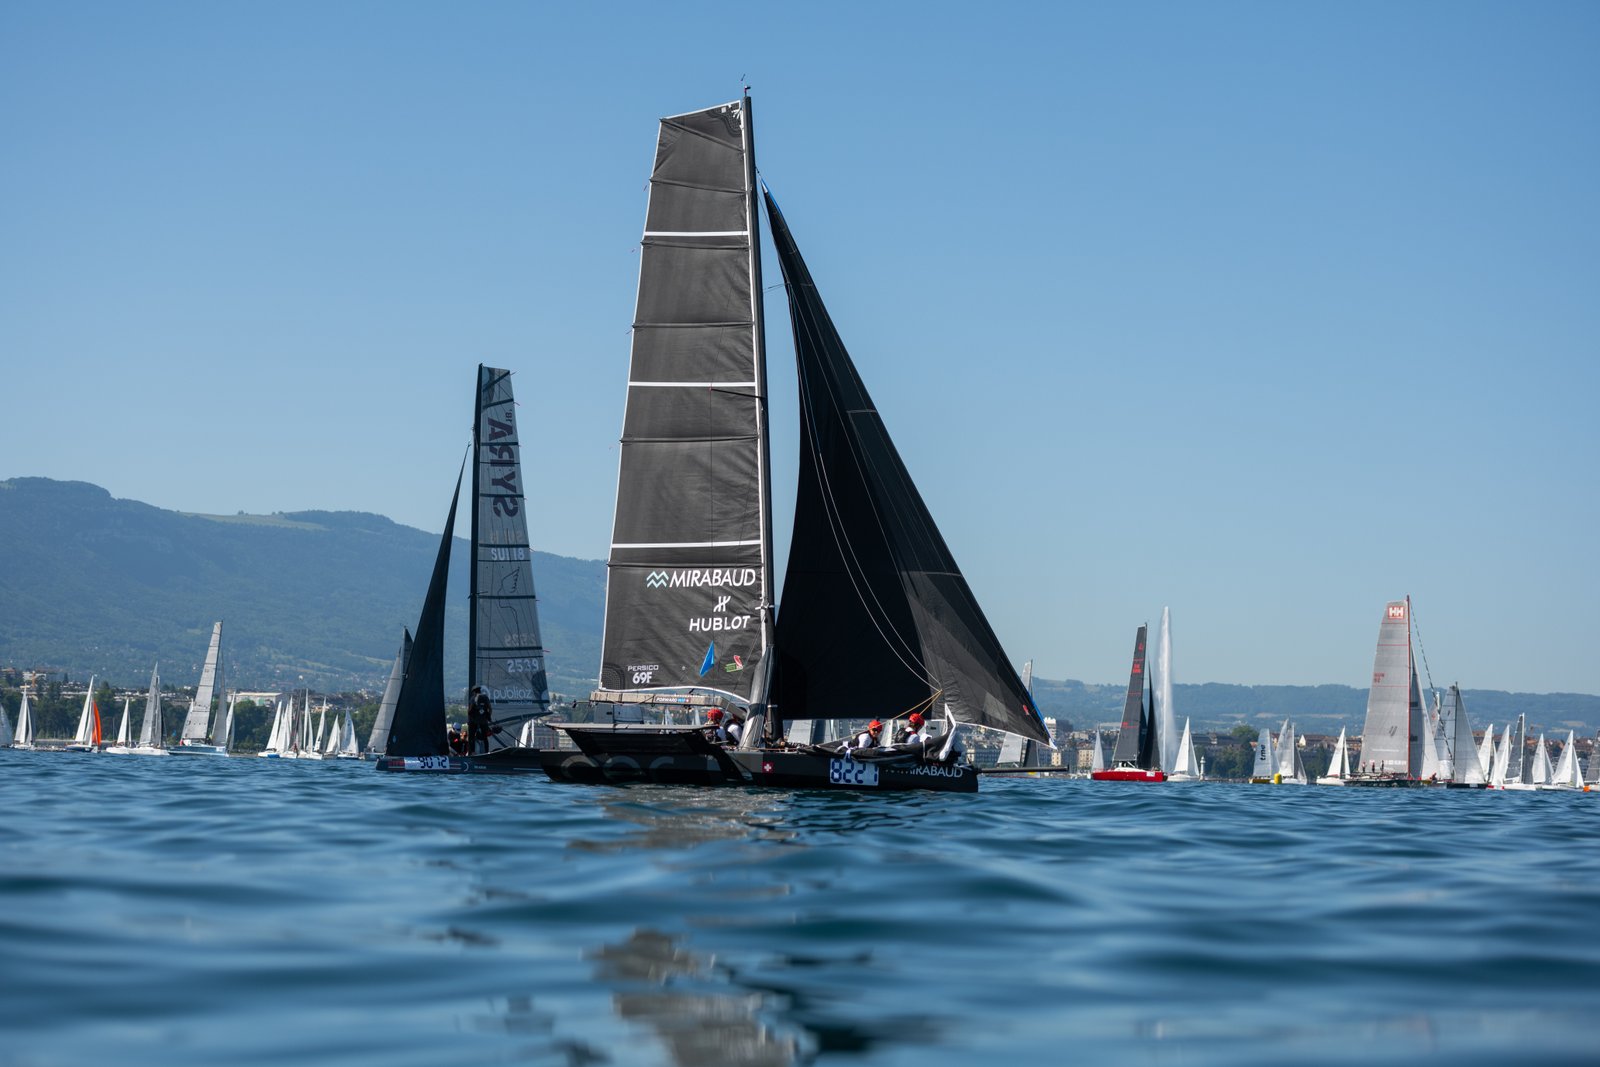 BOL D’OR MIRABAUD : AFTER AN OUTSTANDING VICTORY BY CHRISTIAN WAHL, 2023 BECKONS